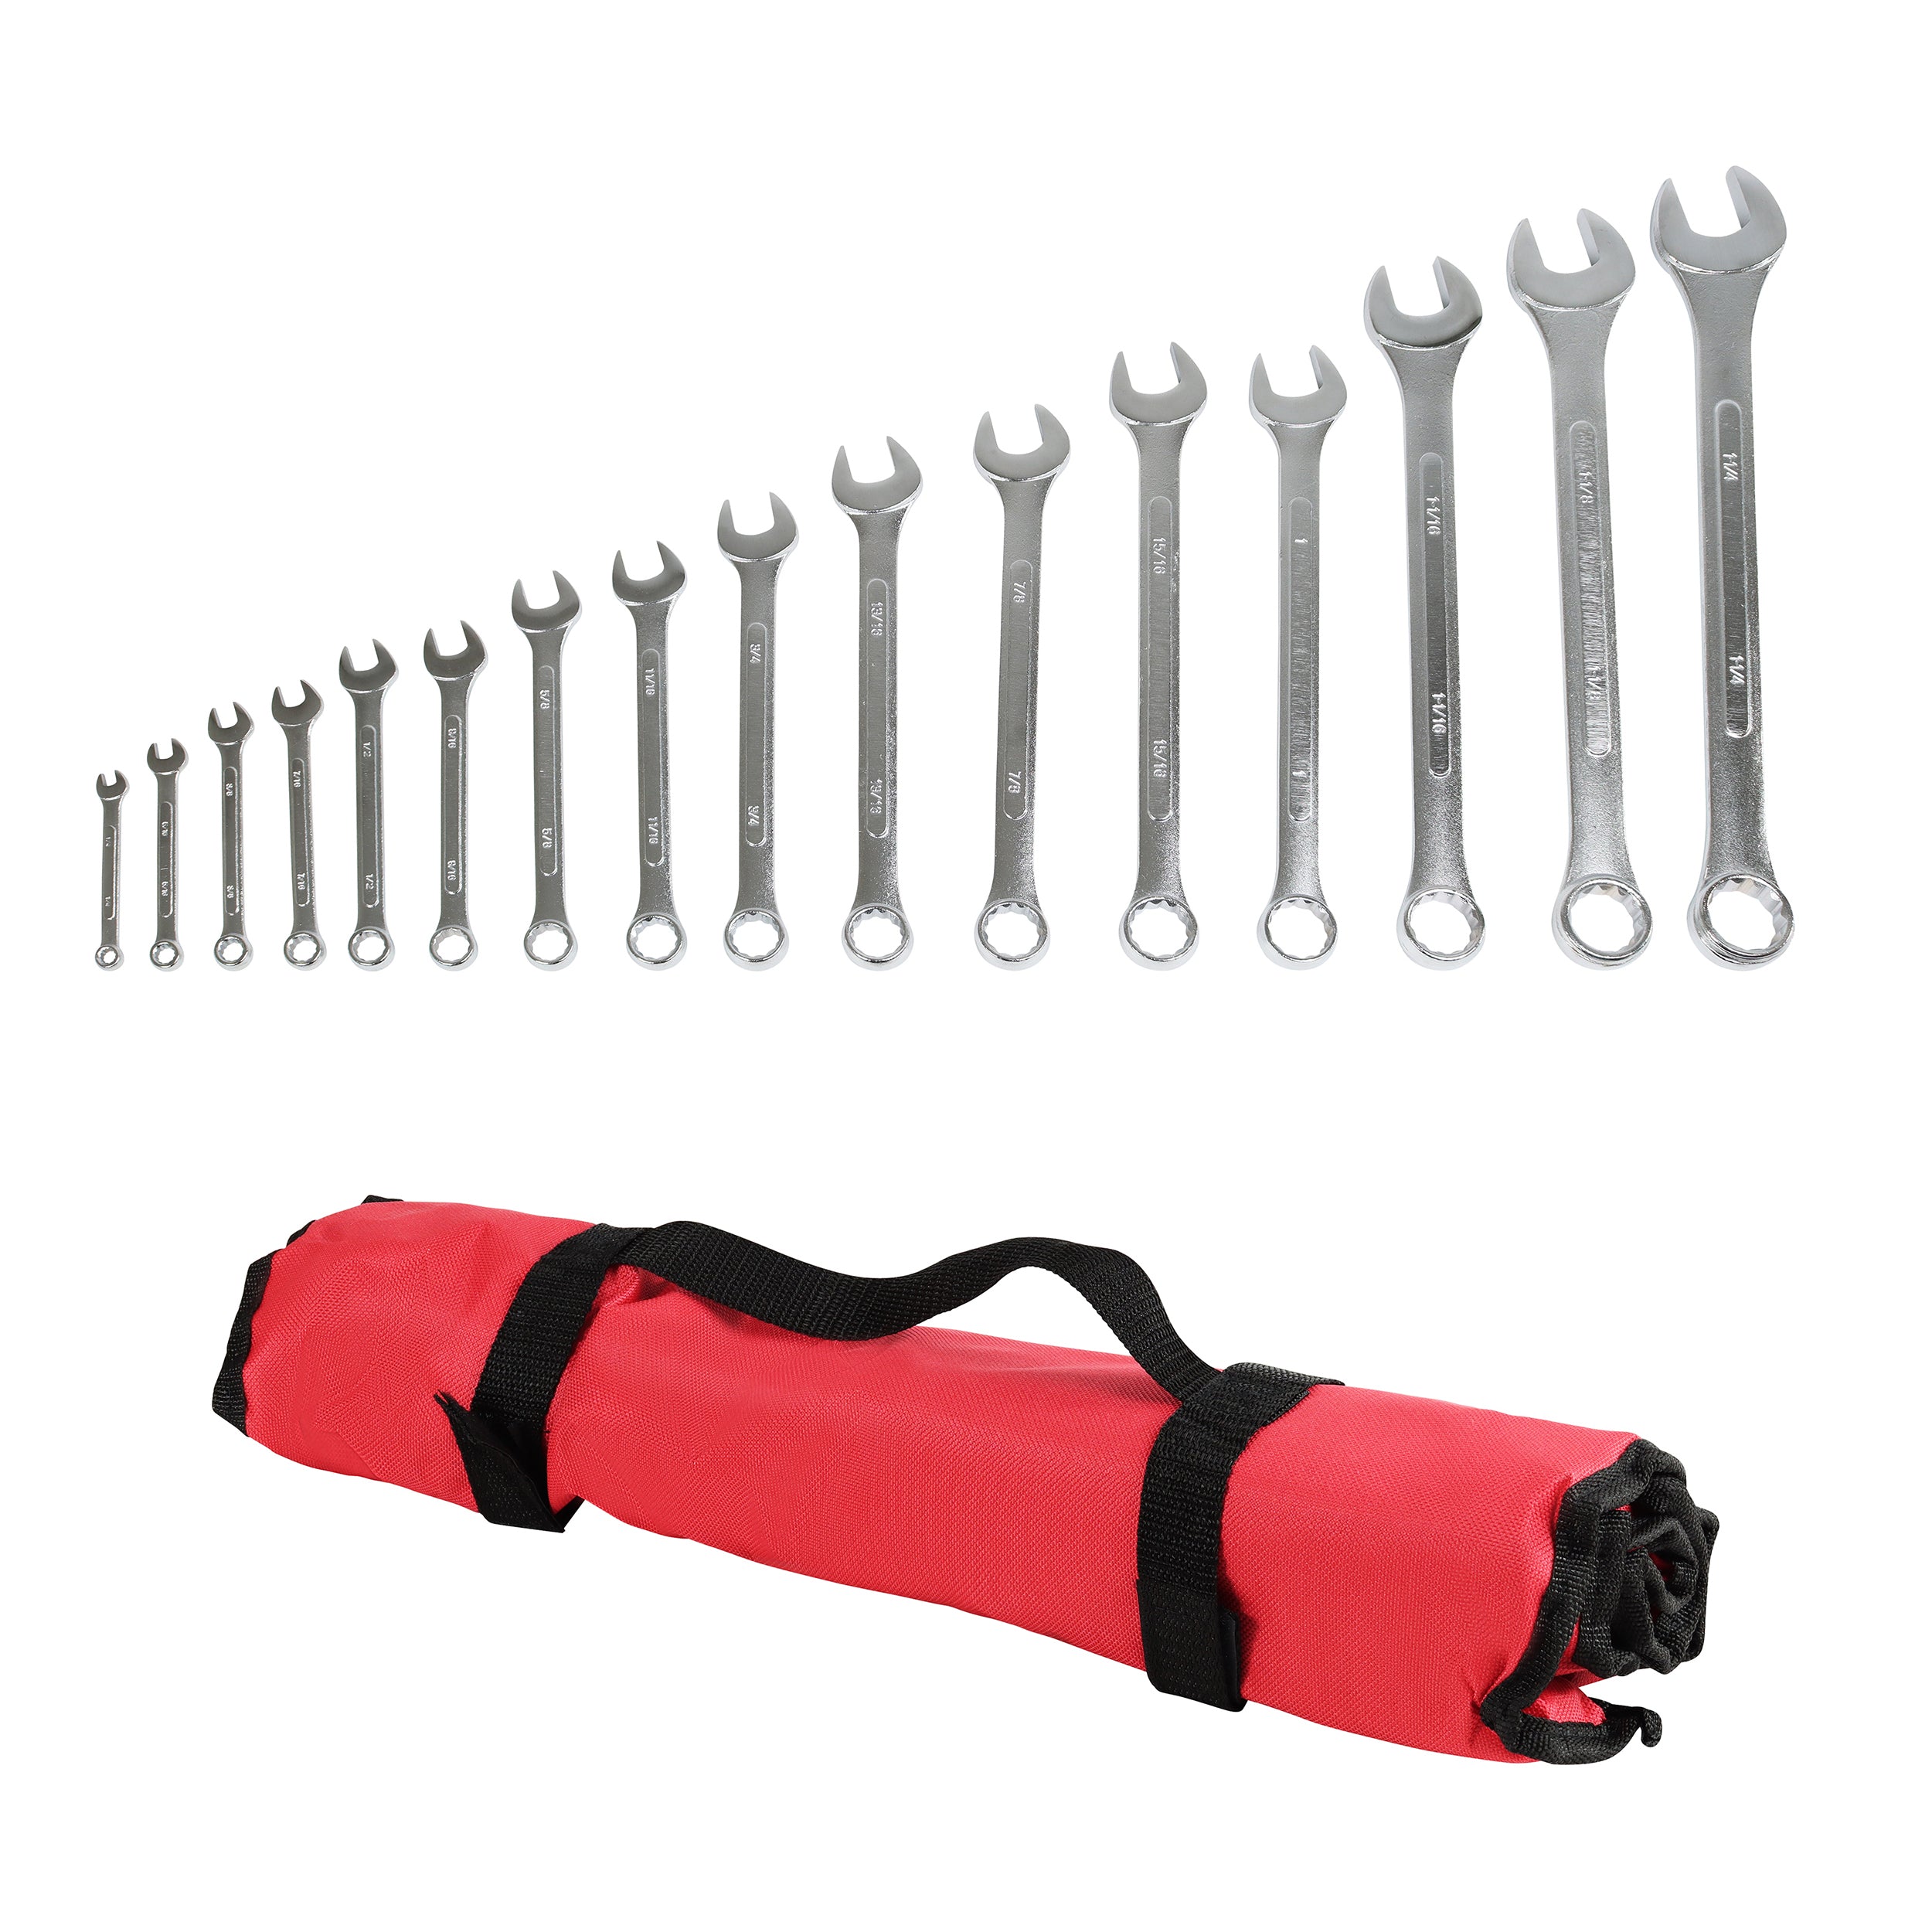 Combination Wrench Set SAE Standard Wrench Set 1/4 to 1-1/4 Inch 16pc